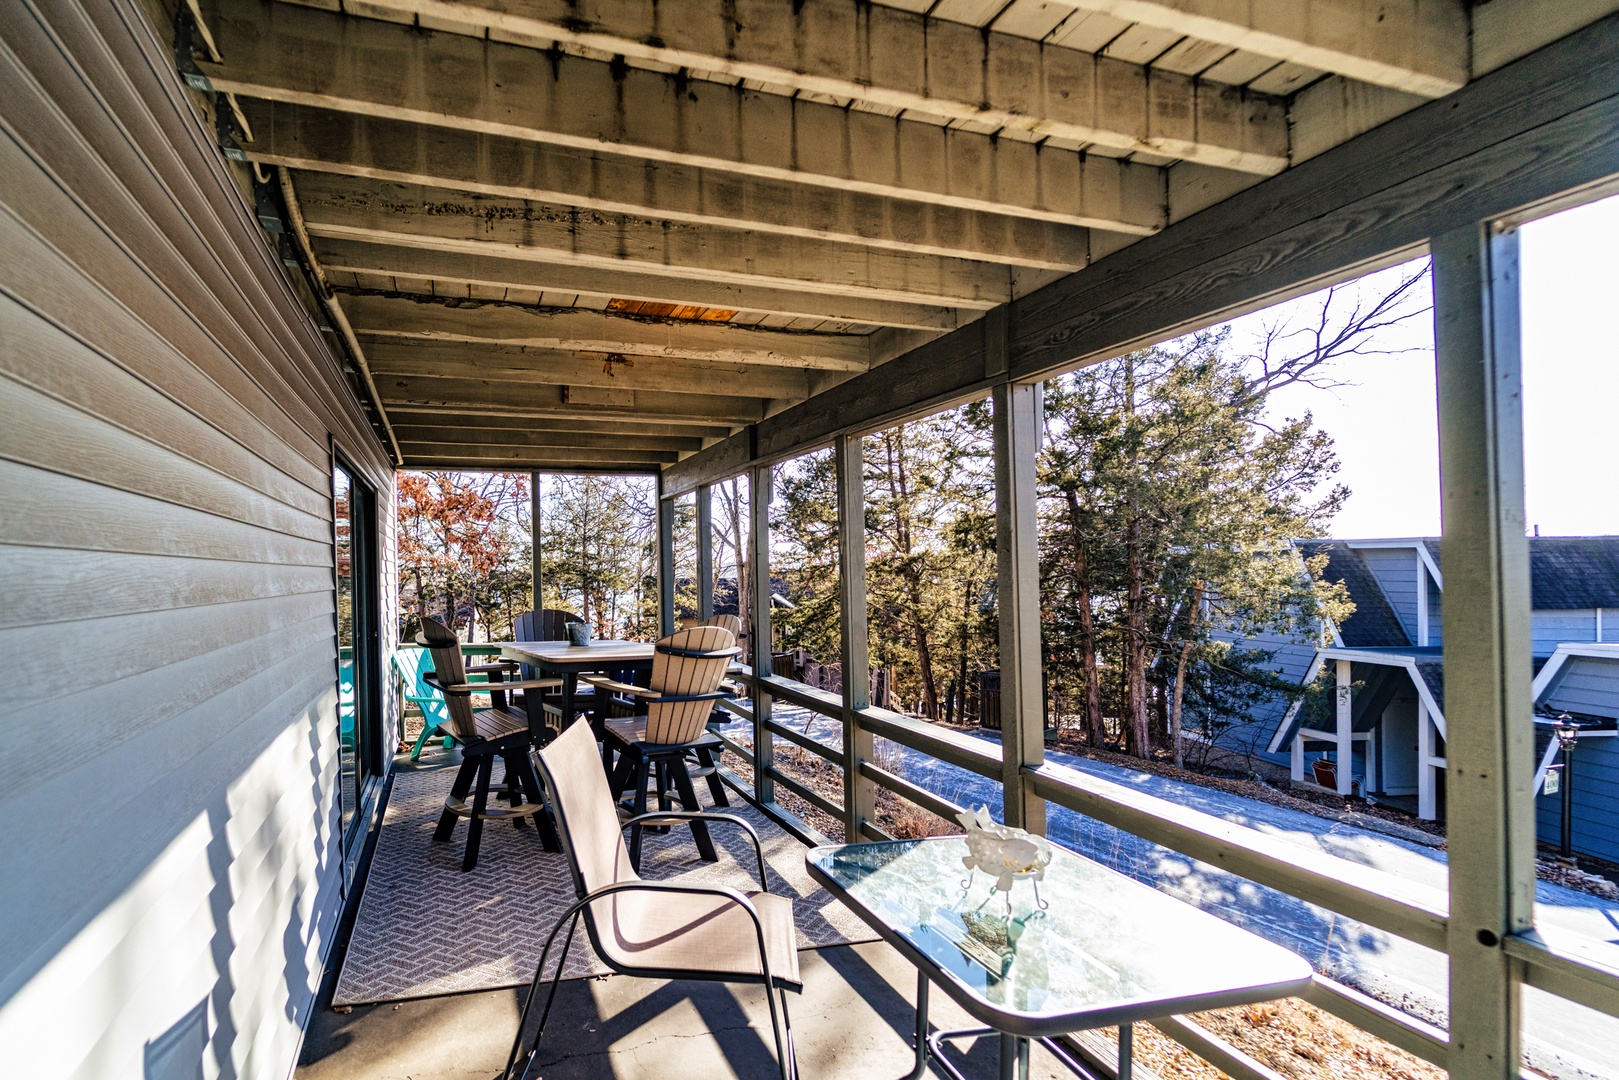 Savor the fresh air and sunshine on the expansive shared back deck